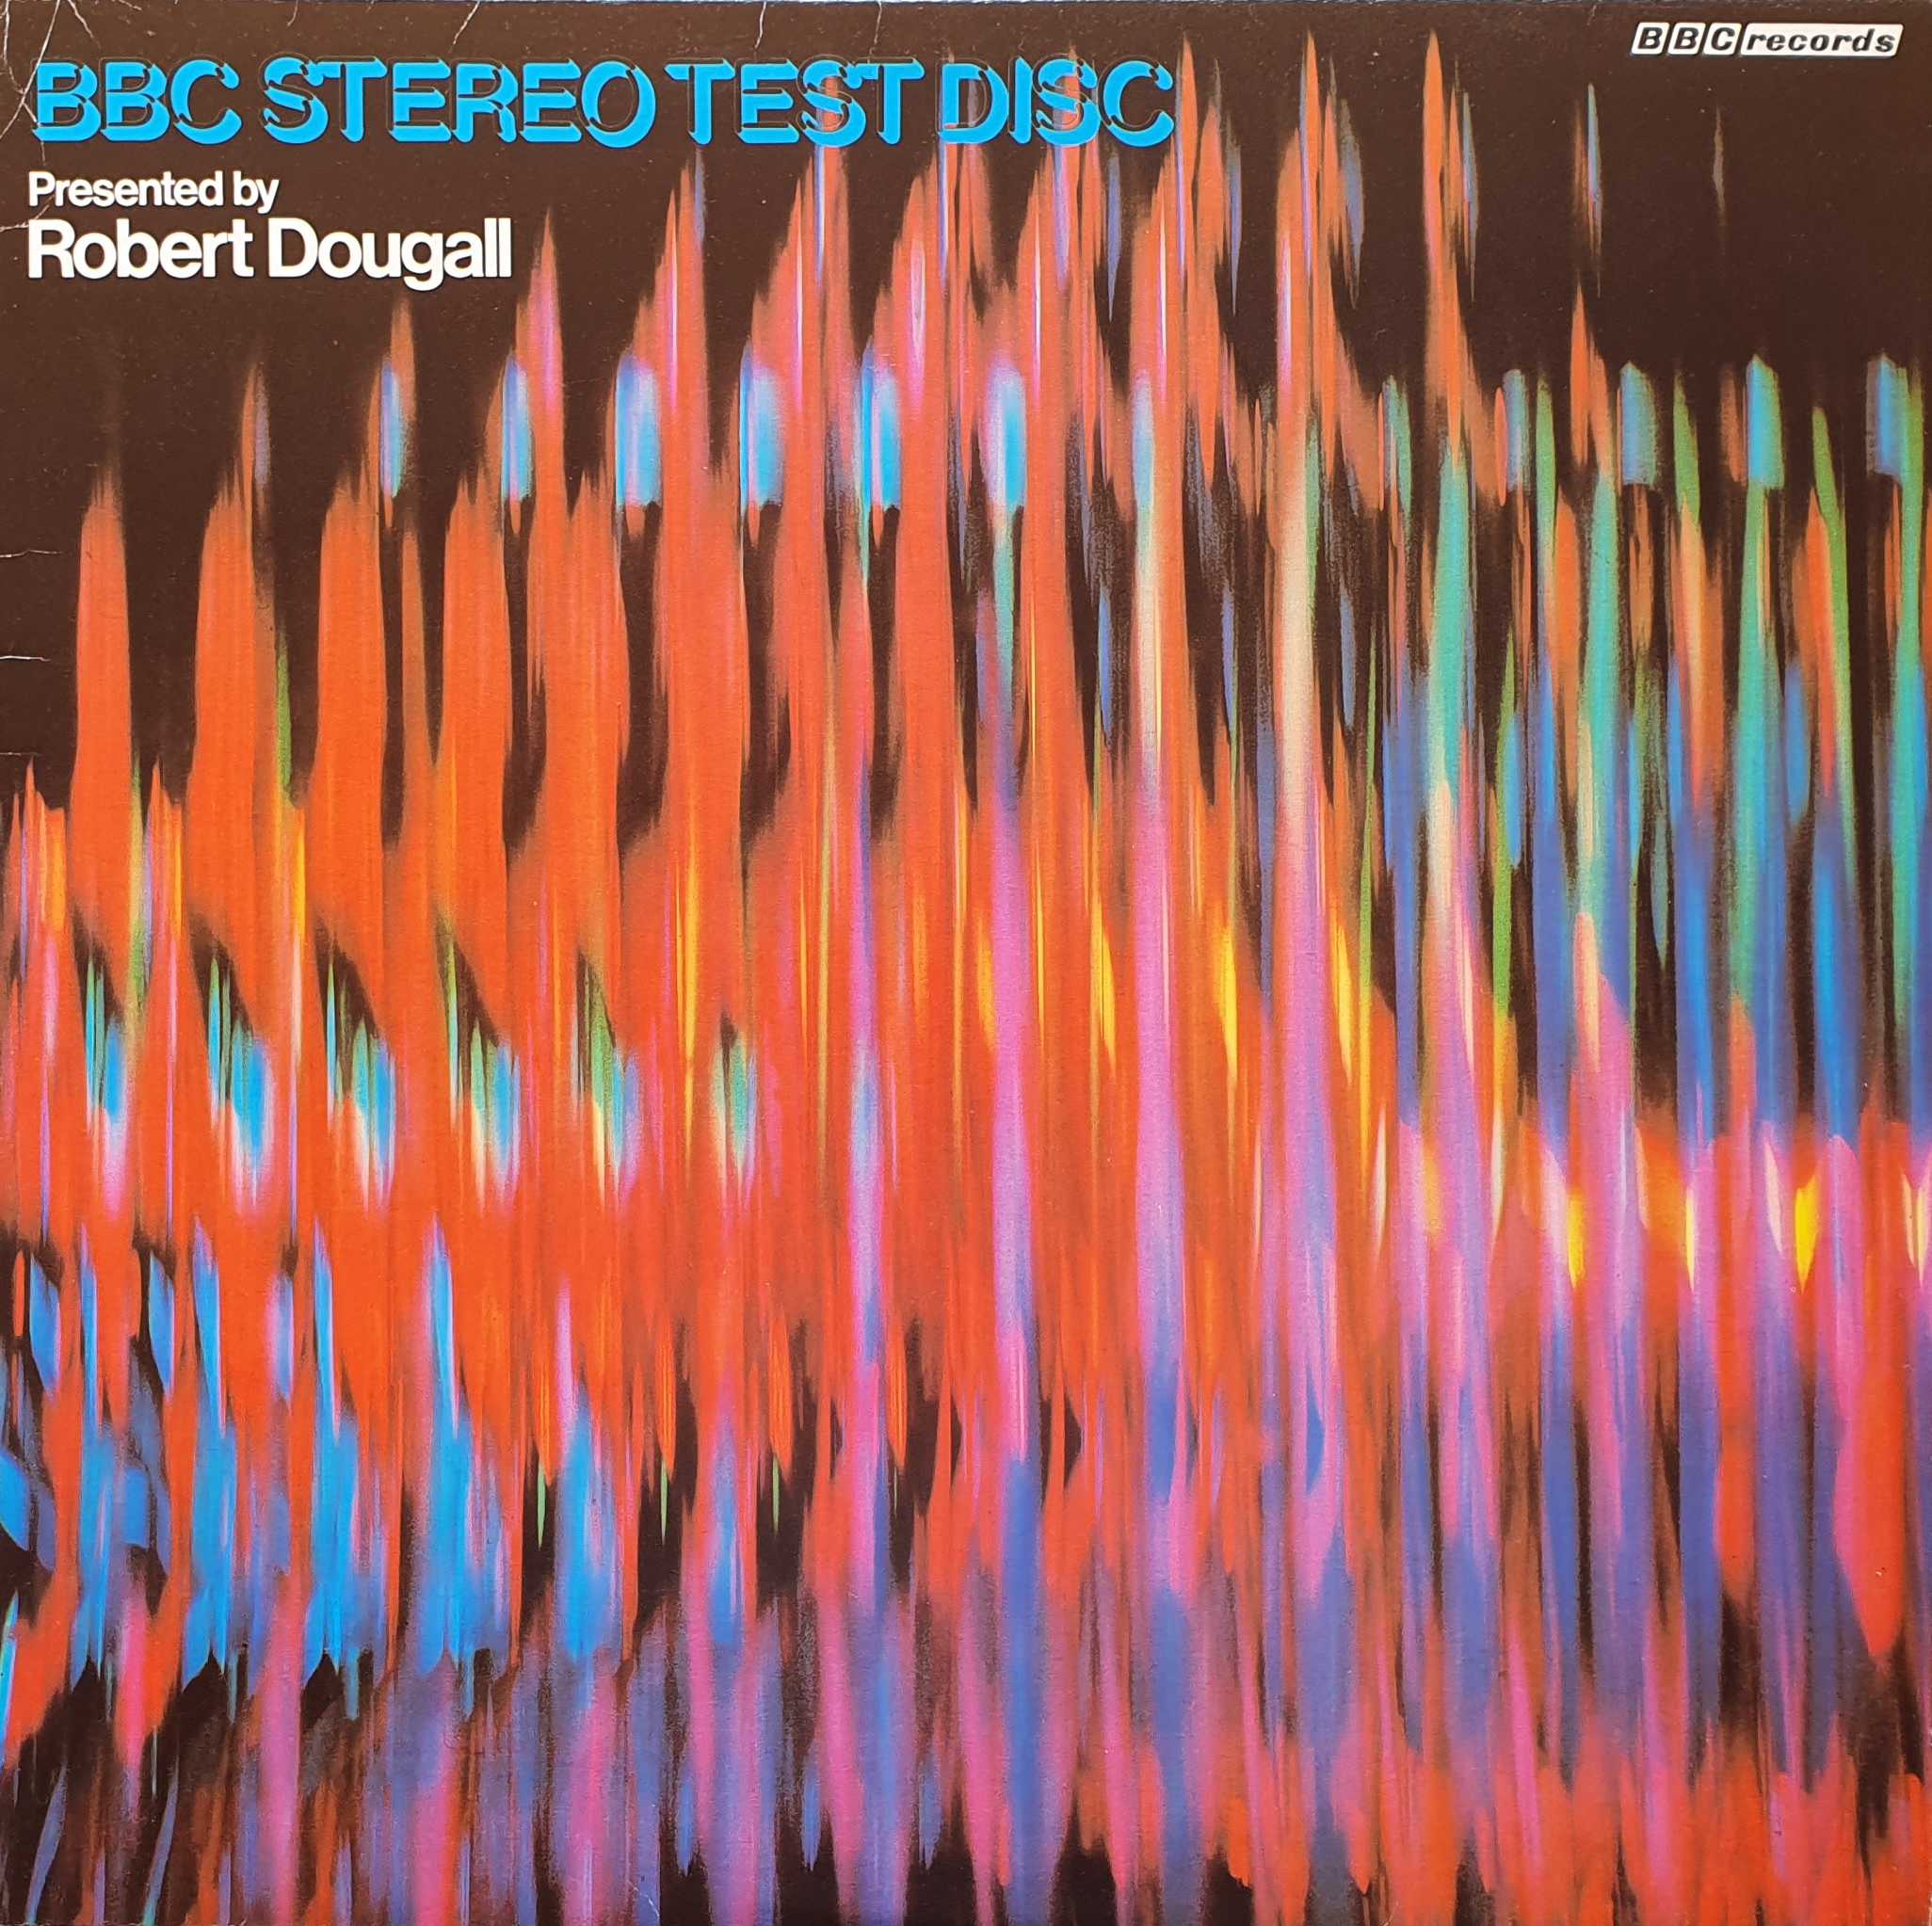 Picture of TRC - 1041 BBC stereo test disc by artist Robert Dougall from the BBC albums - Records and Tapes library